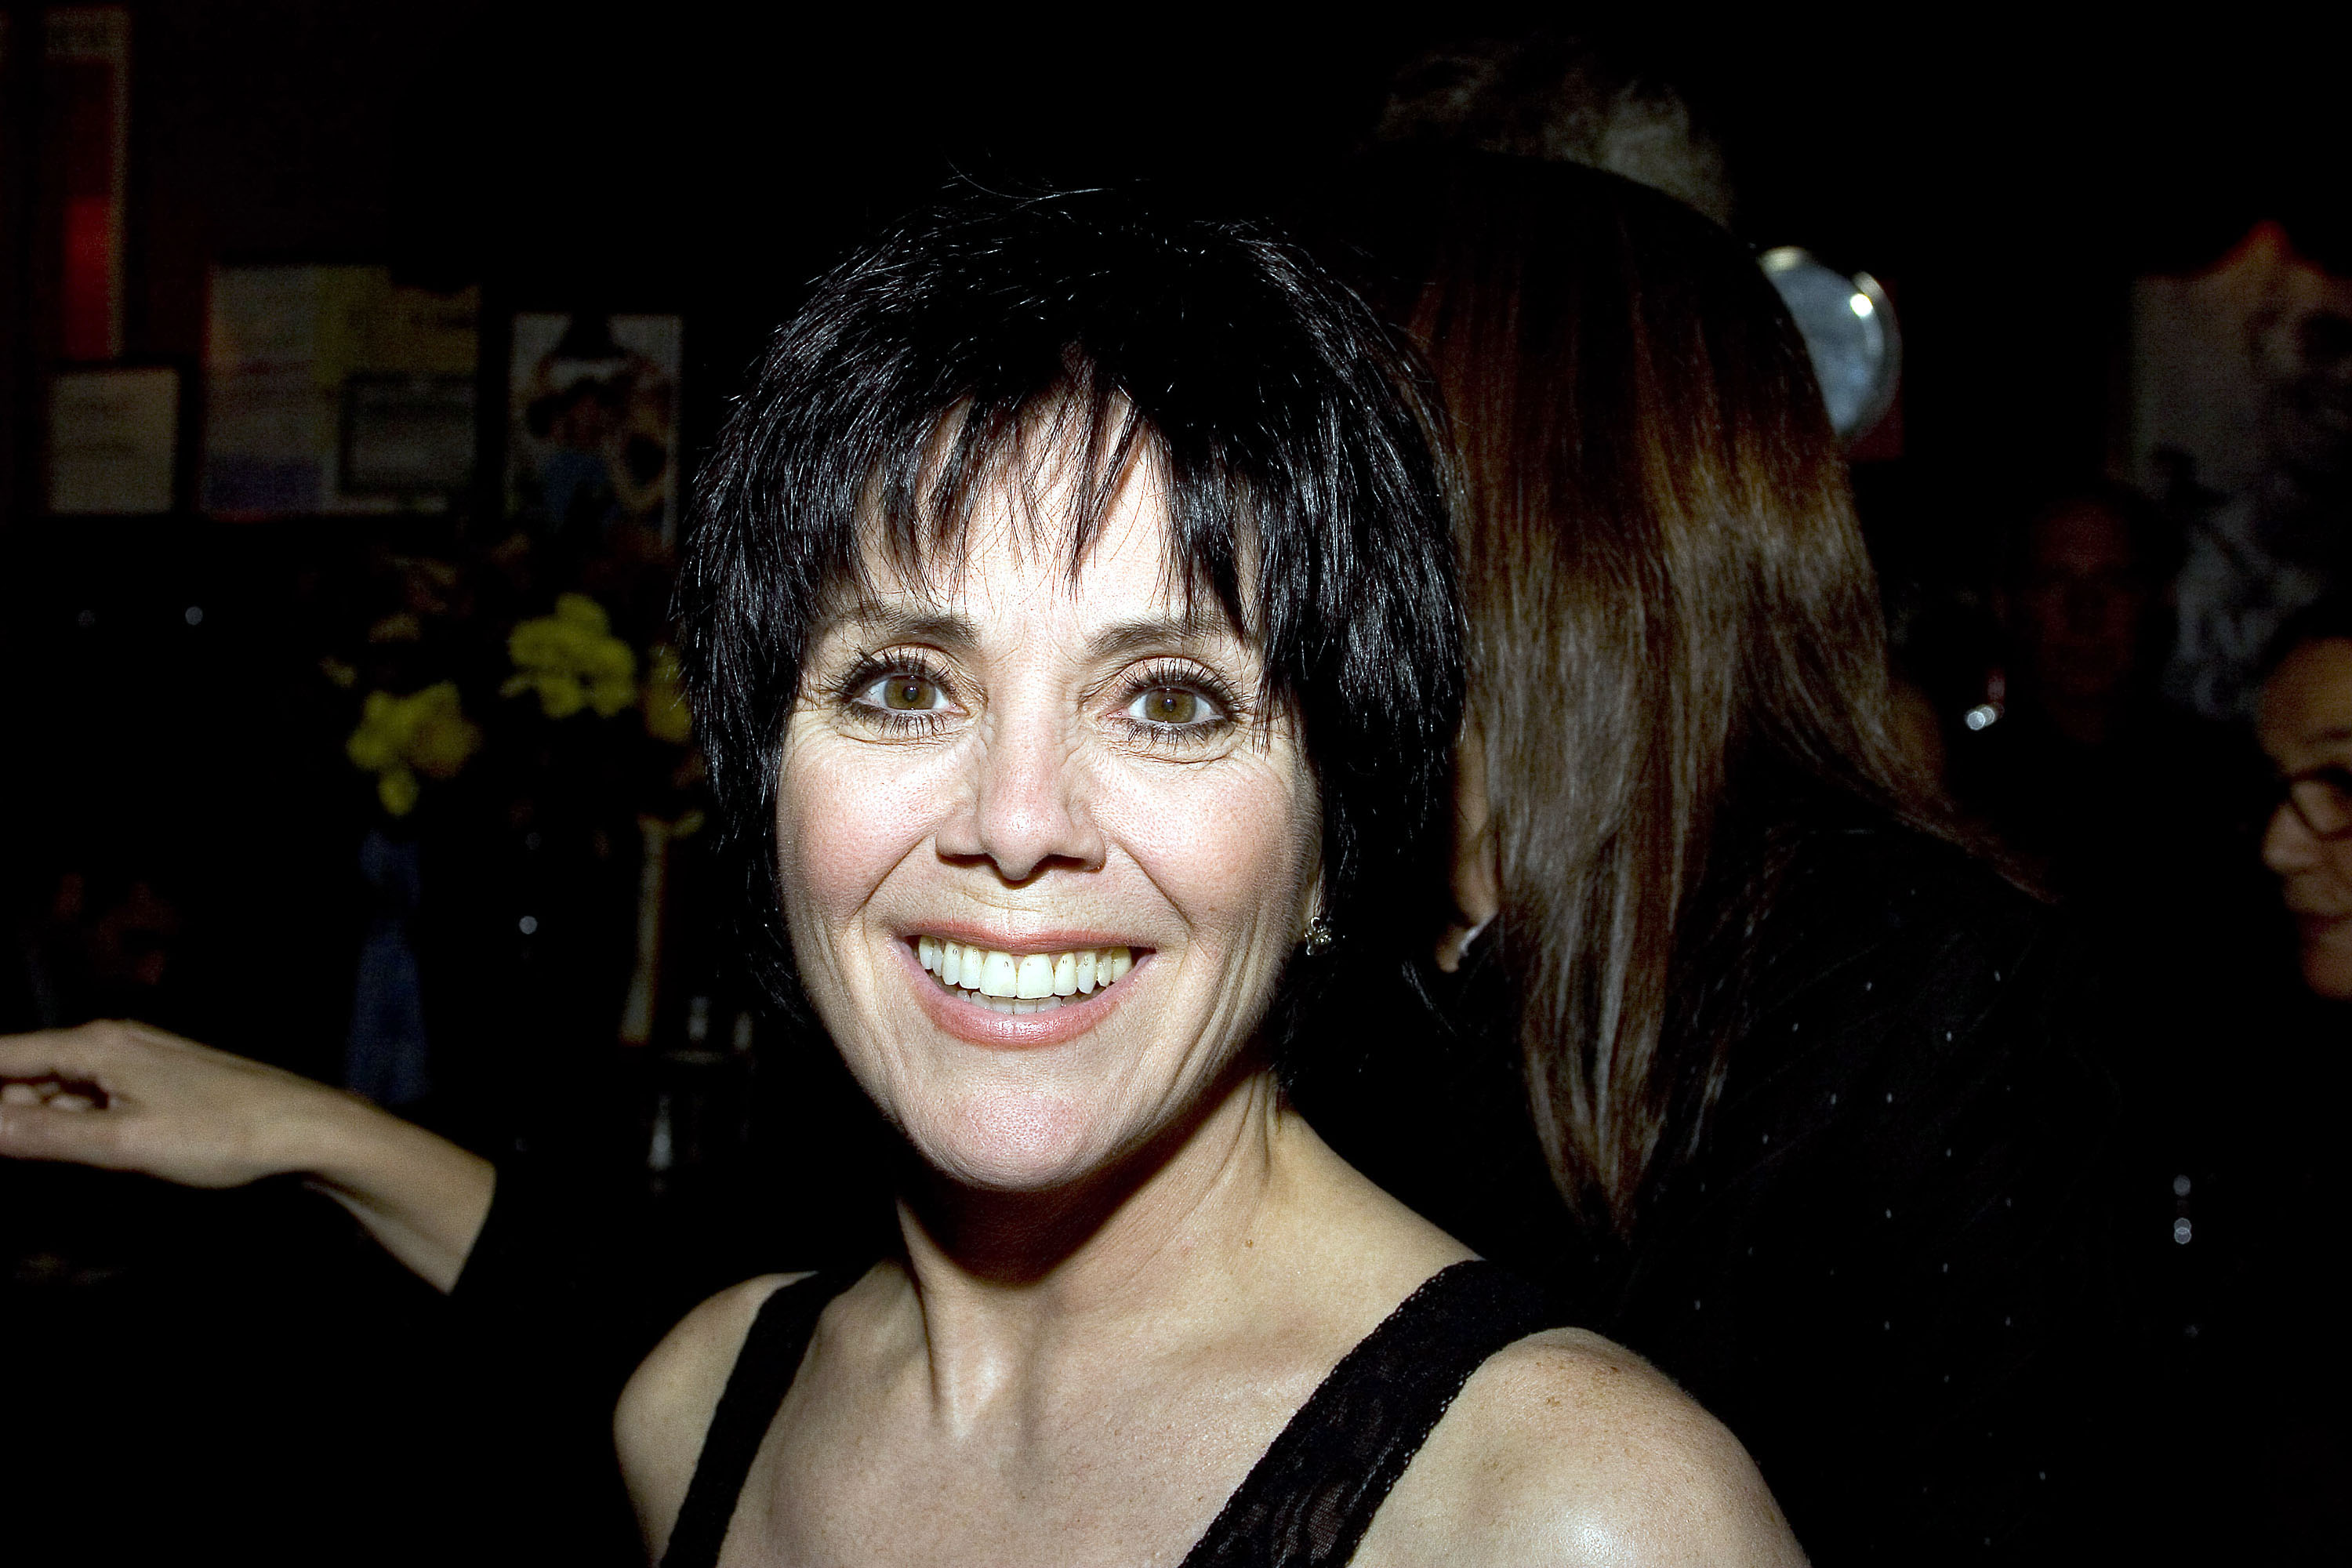 The 'Three's Company' actress who played Janet Wood pictured in 2003